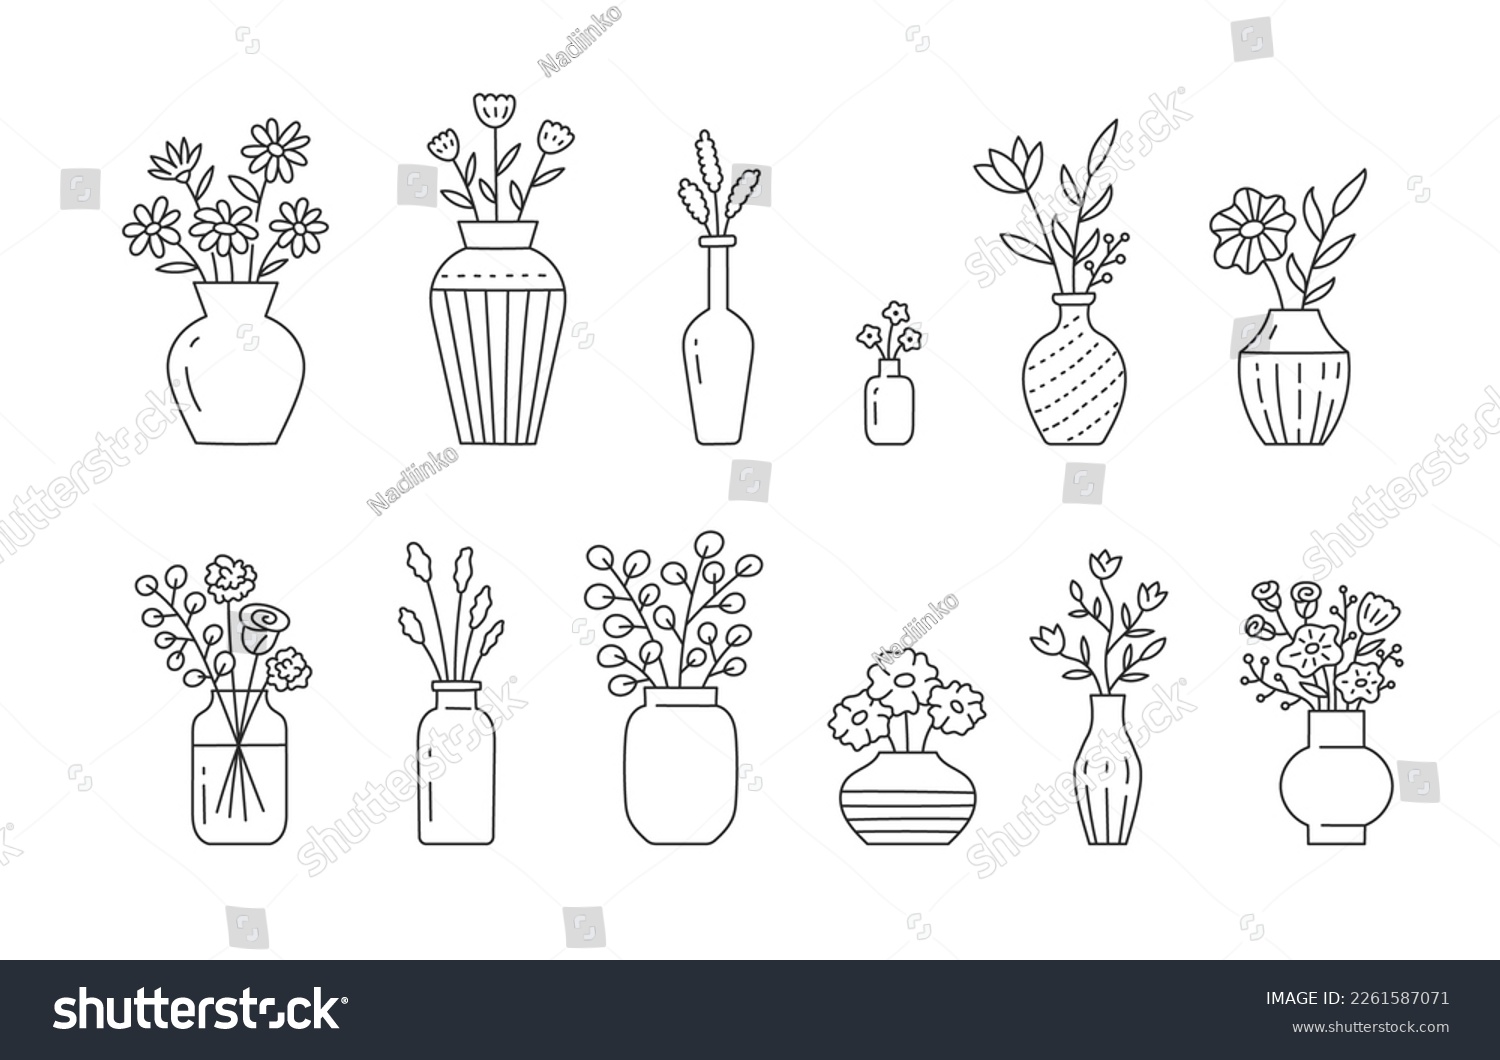 Flower in vase doodle illustration including different floral bouquets. Hand drawn cute line art about plants in interior. Thin linear drawing for coloring. Editable Stroke #2261587071